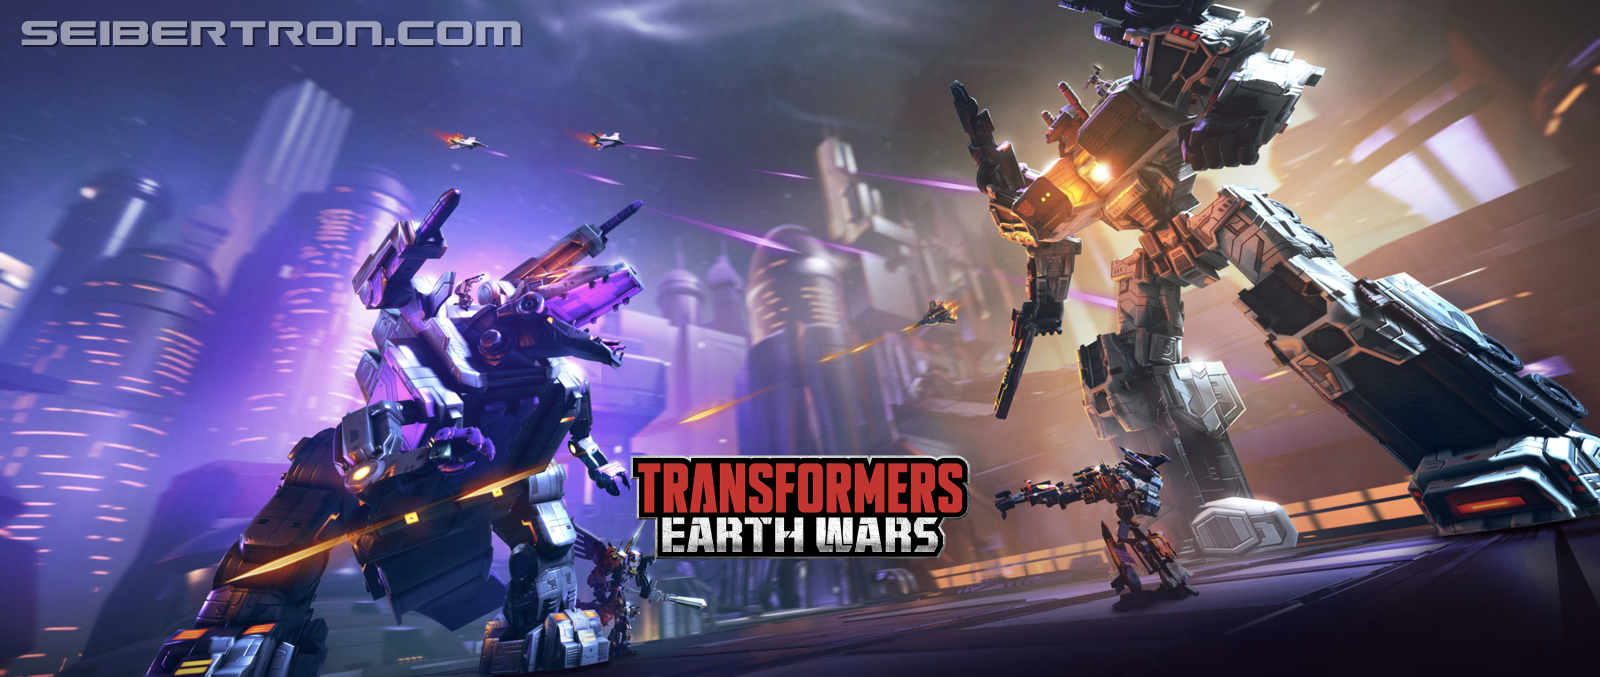 New Transformers Earth Wars Loading Screen And Details For Weekend Event Planet Terror - brawl stars season 2 loading screen